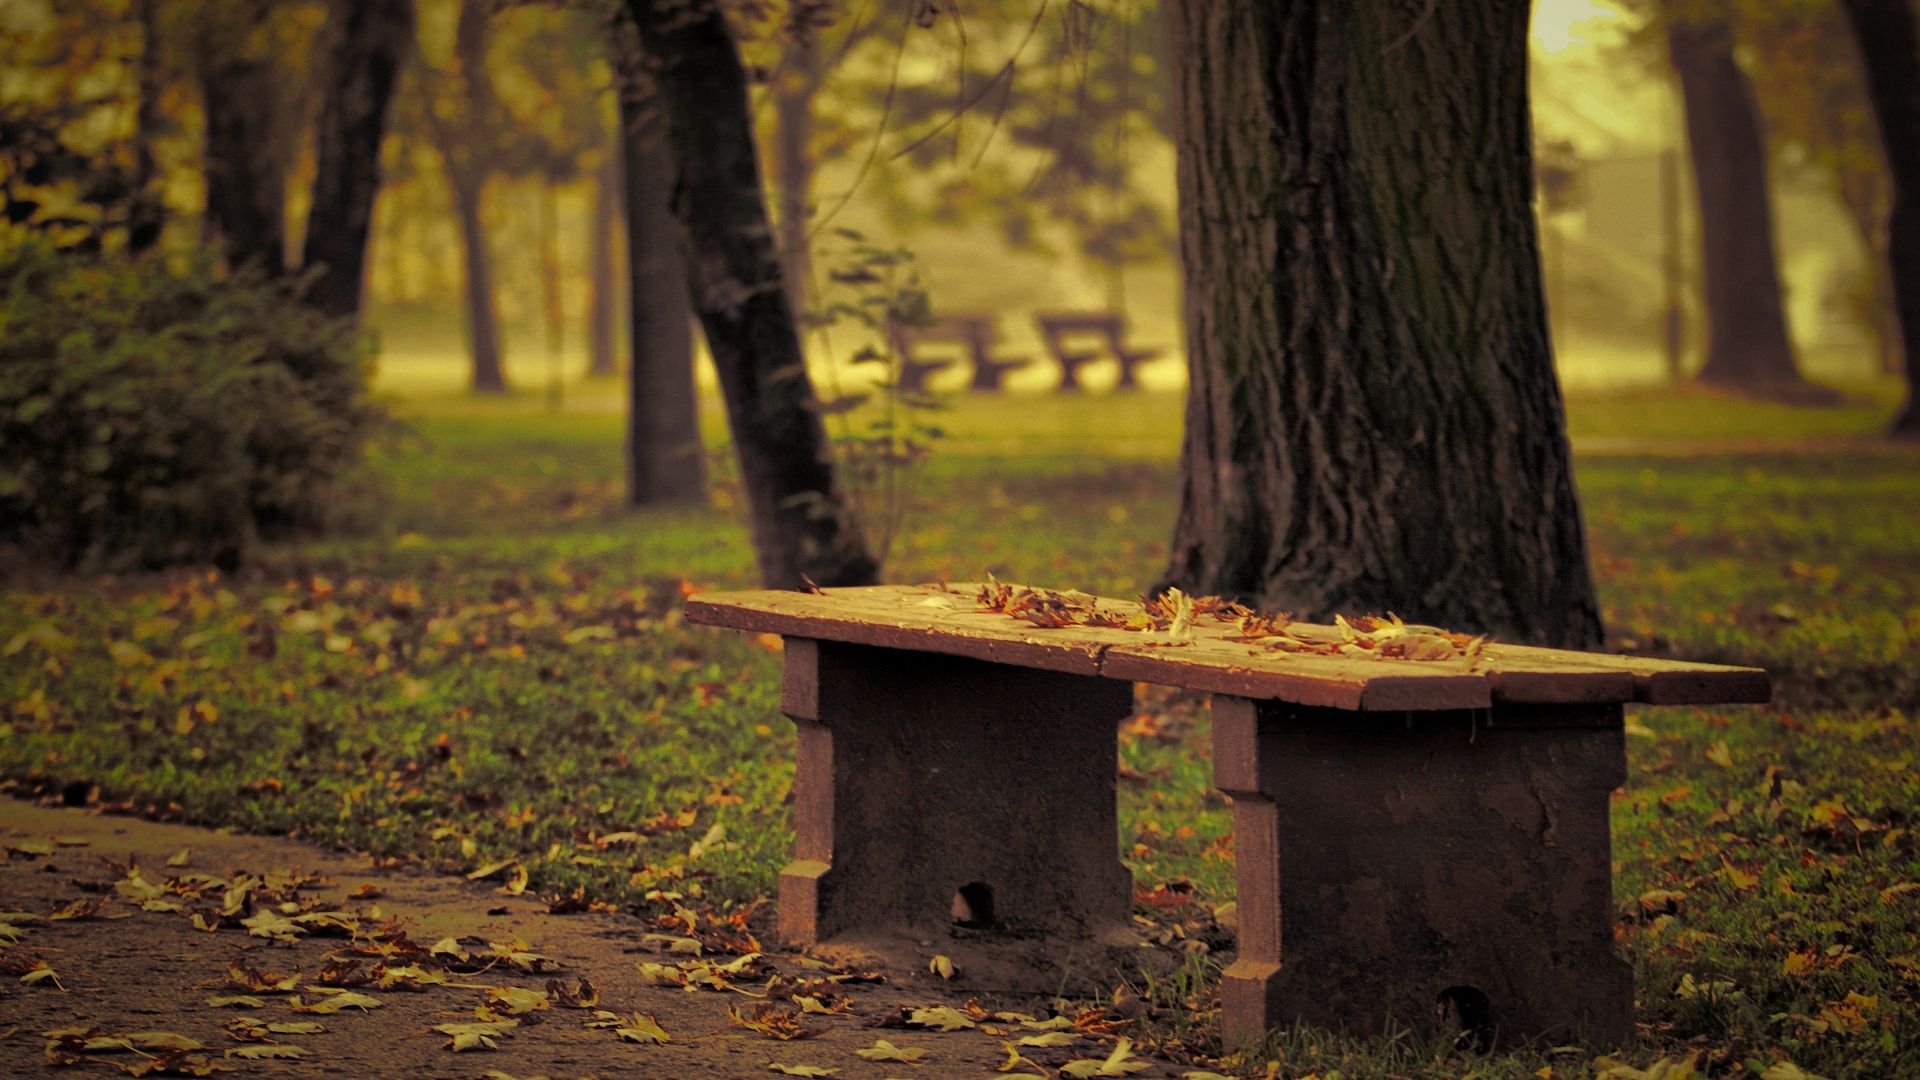 Download Wallpaper 1920x1080 Bench, Park, Leaves, Autumn, Trees ...